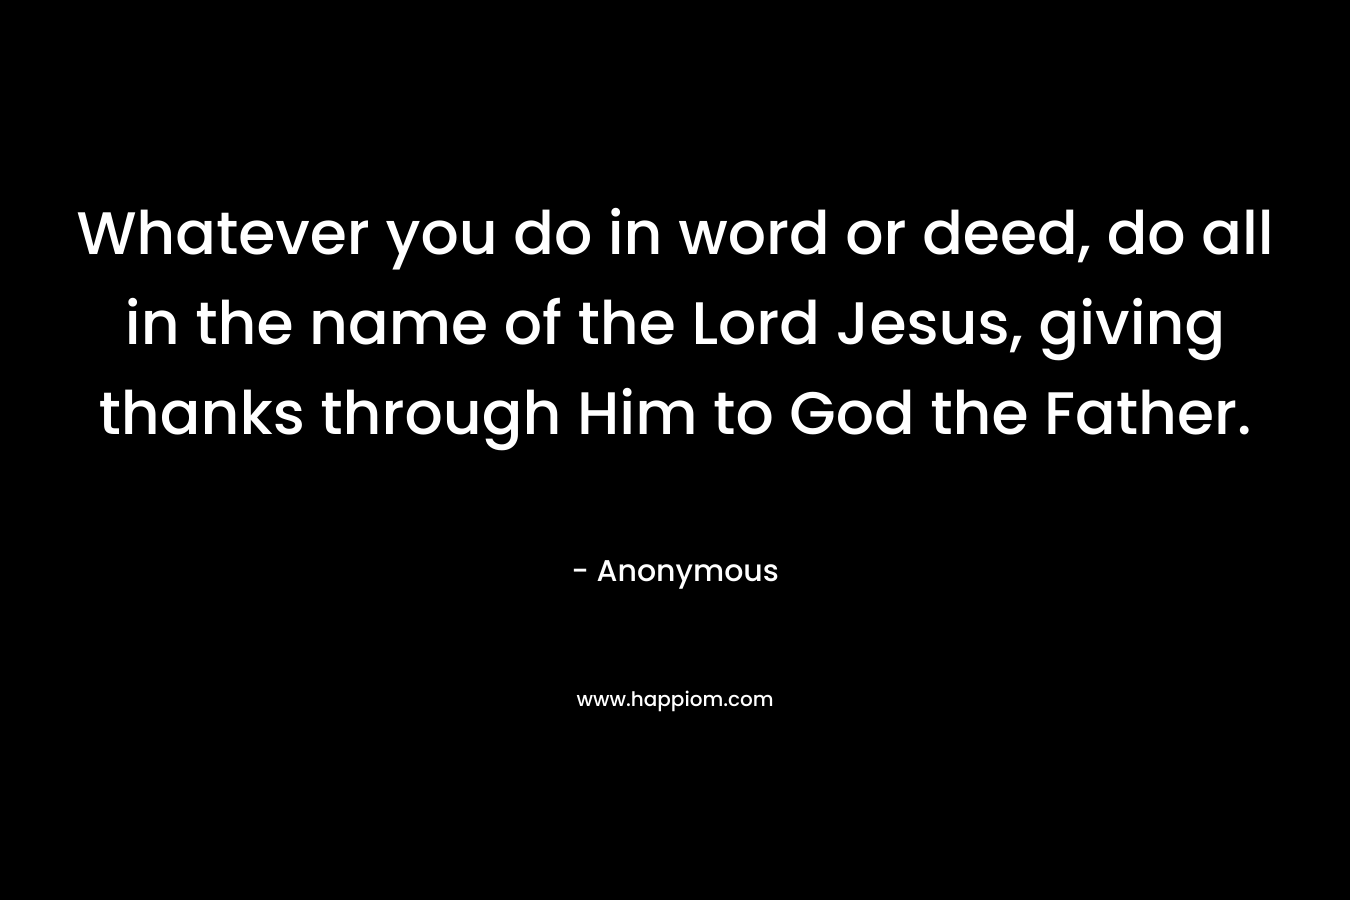 Whatever you do in word or deed, do all in the name of the Lord Jesus, giving thanks through Him to God the Father.